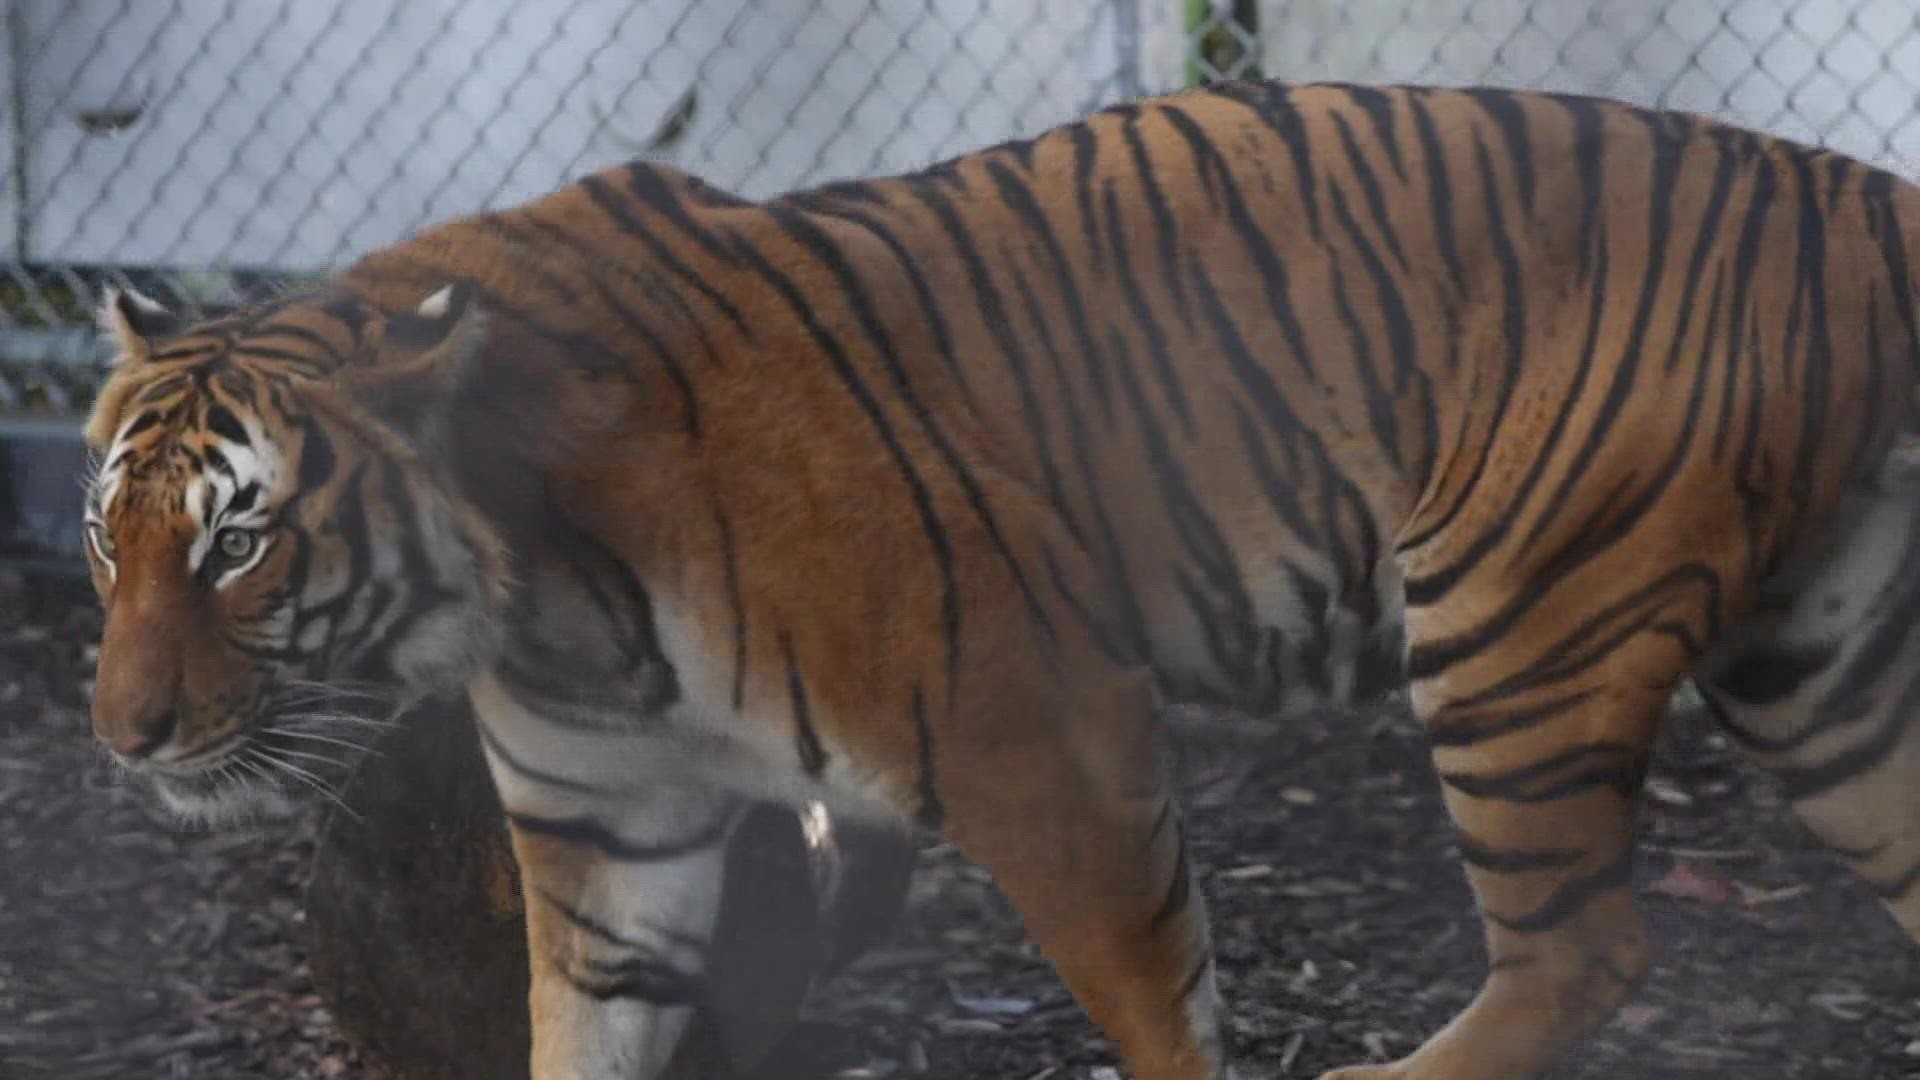 The zoo released a social media video introducing us all to Tahan, a Malaysian tiger. Tahan is the brother of Tanvir and Bashir, two previous tigers from the zoo.